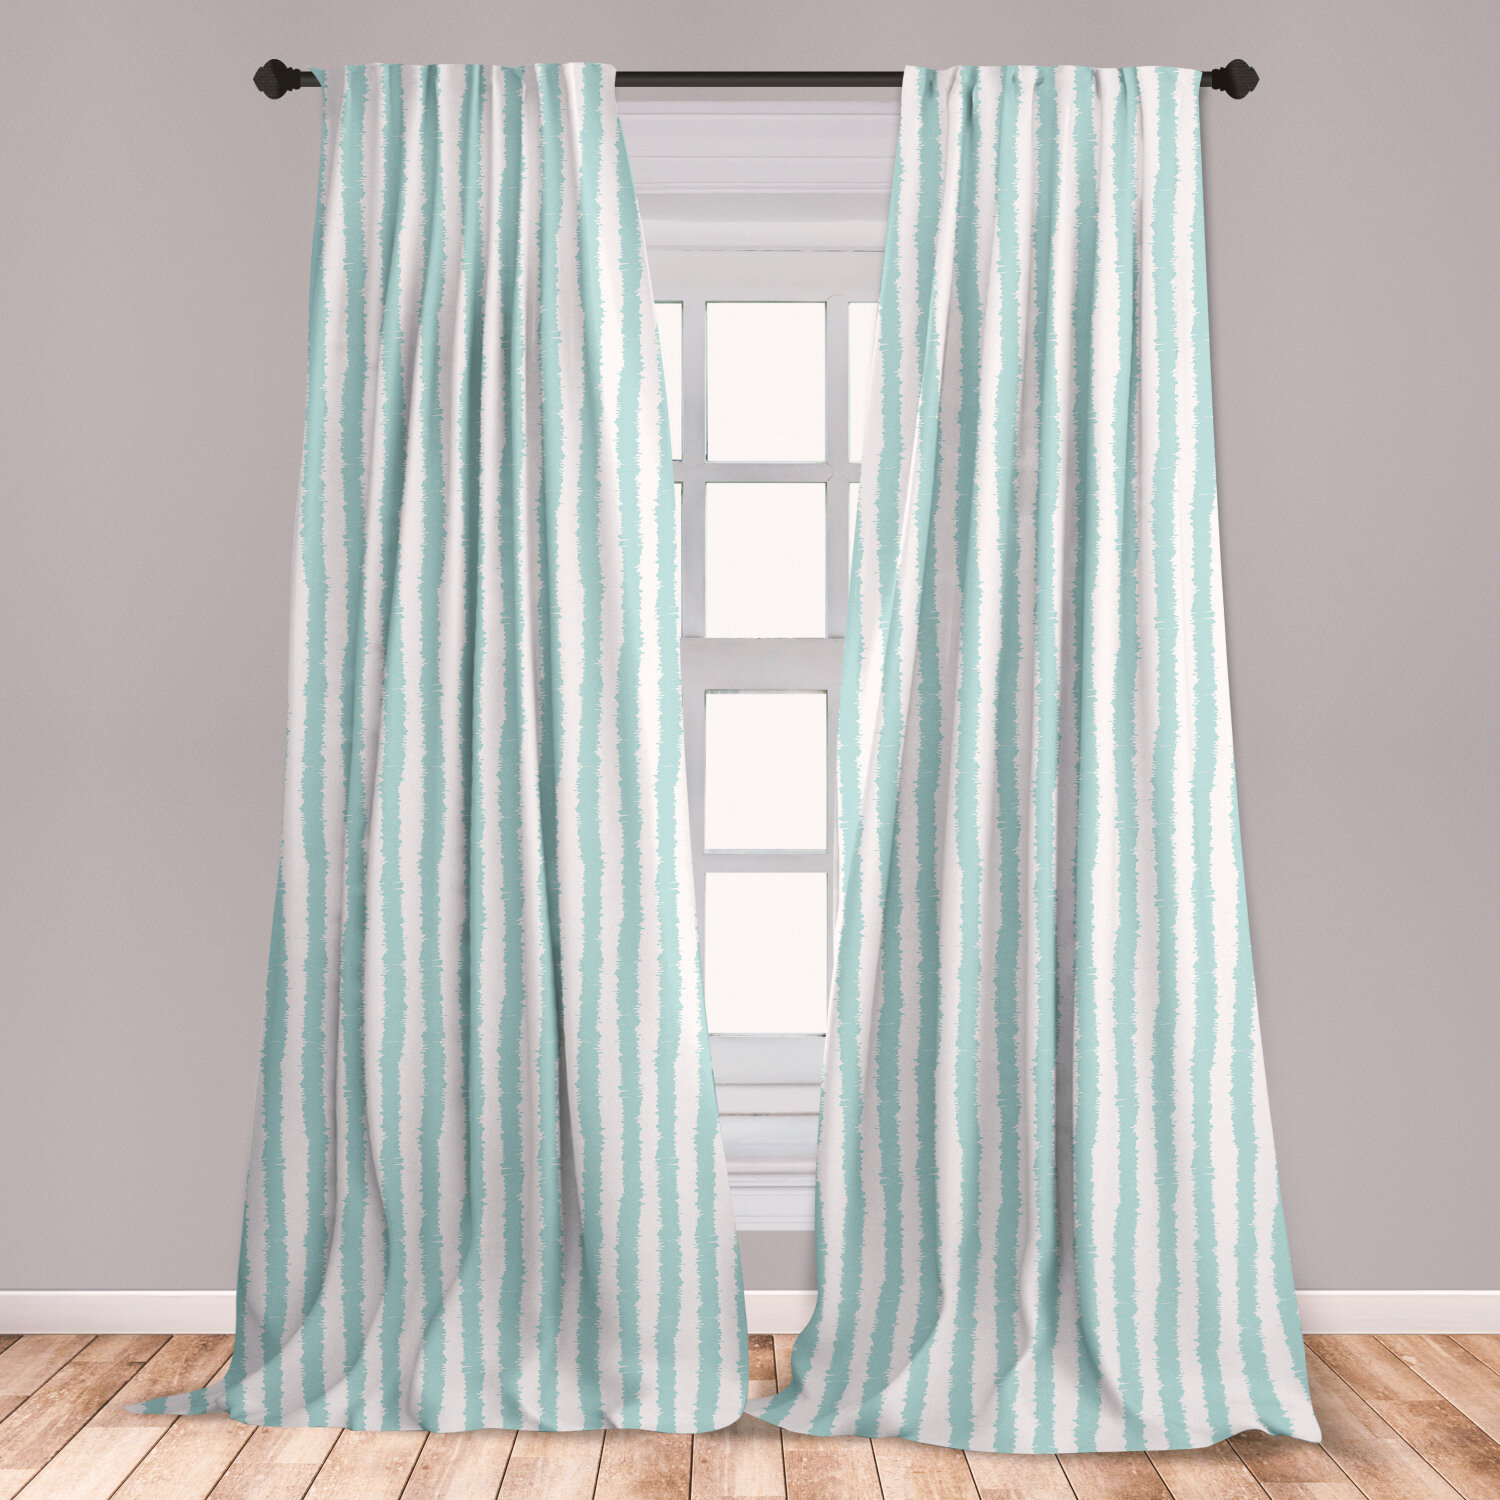 Ambesonne Aqua Curtains Vertical Striped Pattern With Sketchy Lines Hipster And Grunge Design Ikat Inspired Window Treatments 2 Panel Set For Living